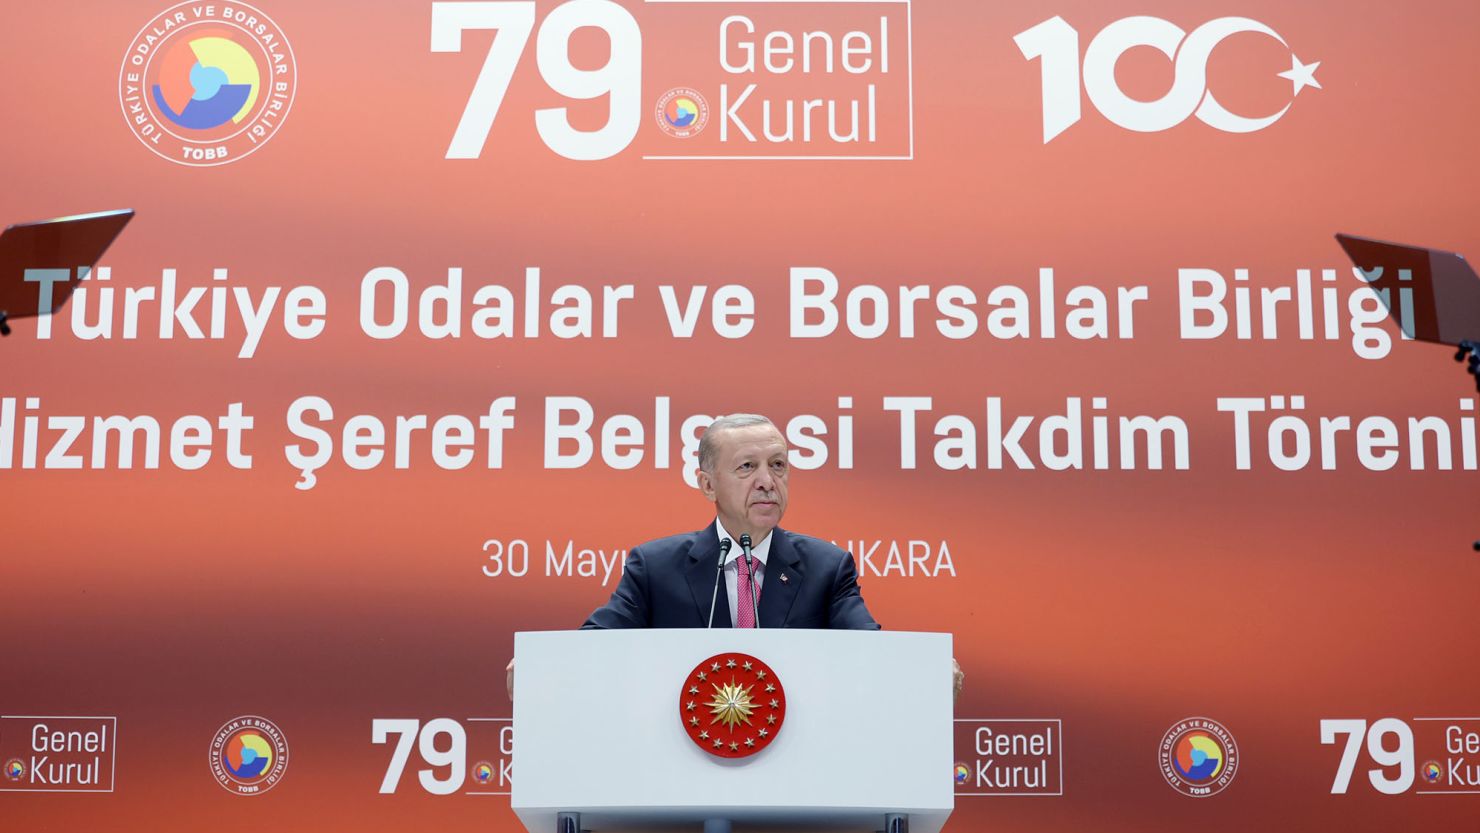 Turkish President Recep Tayyip Erdogan gives a speech during the 79th General Assembly of the Union of Chambers and Commodity Exchanges of Turkey in Ankara on Tuesday.